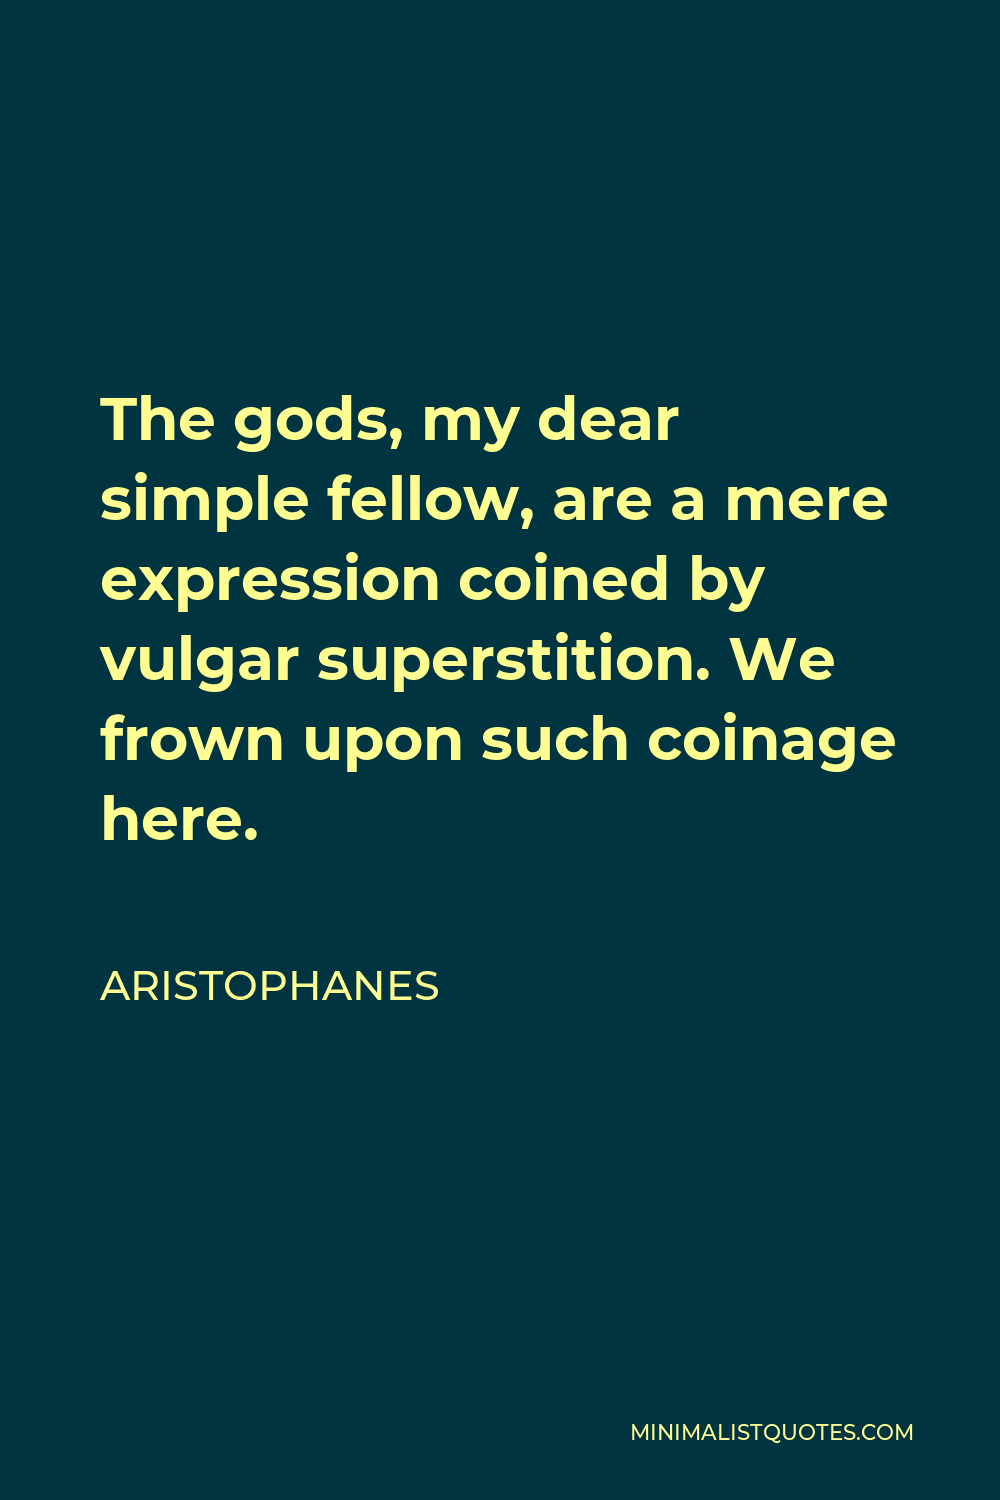 Aristophanes Quote - The gods, my dear simple fellow, are a mere expression coined by vulgar superstition. We frown upon such coinage here.